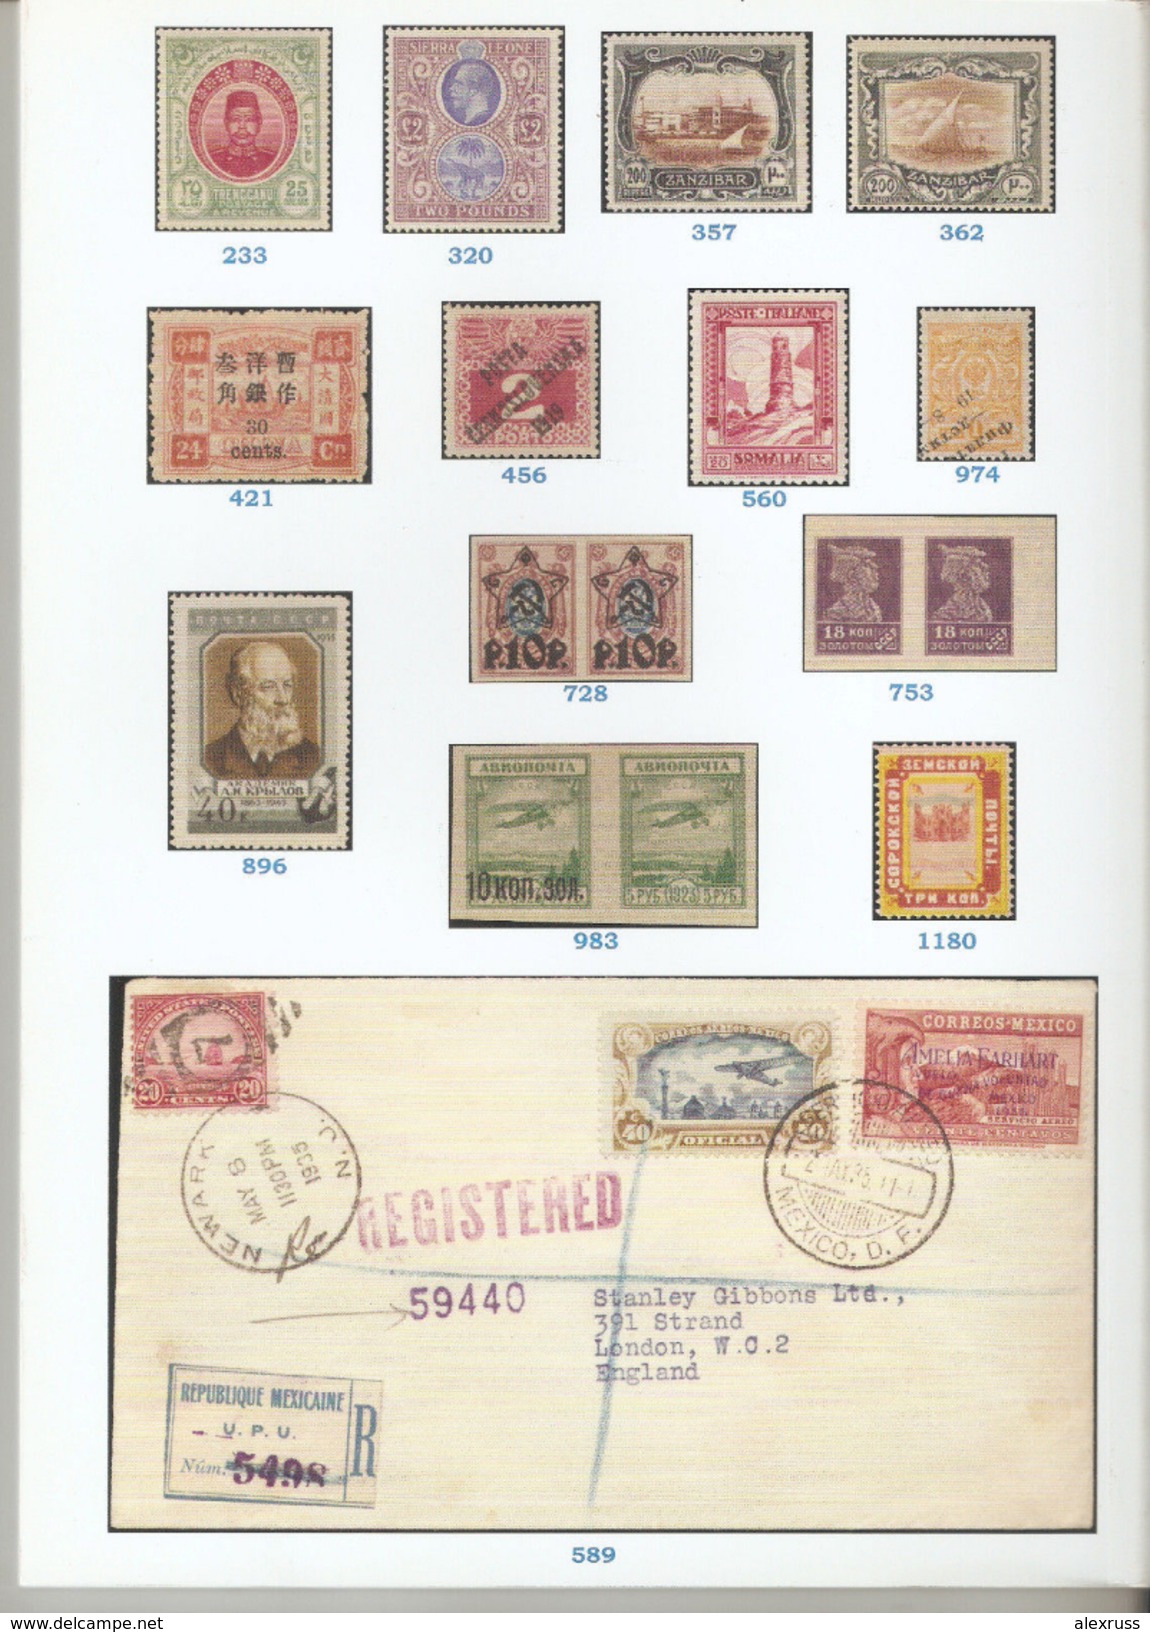 Raritan Stamps Auction 64,Mar 2015 Catalog Of Rare Russia Stamps,Errors & Worldwide Rarities - Catalogues For Auction Houses